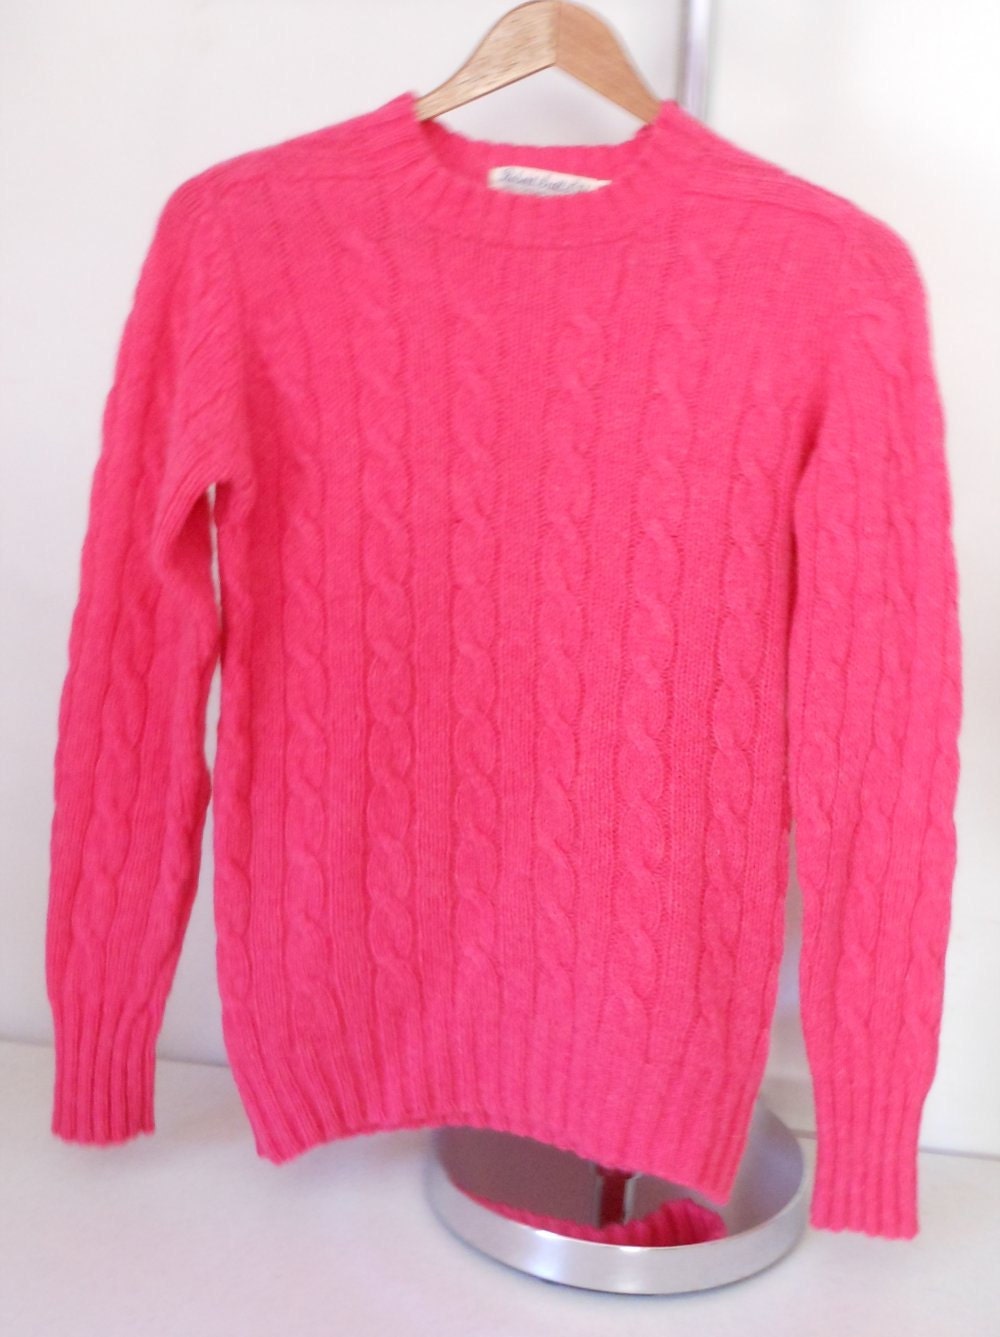 SUMMER SALE Hot Pink Sweater Pullover Cableknit Shetland Wool